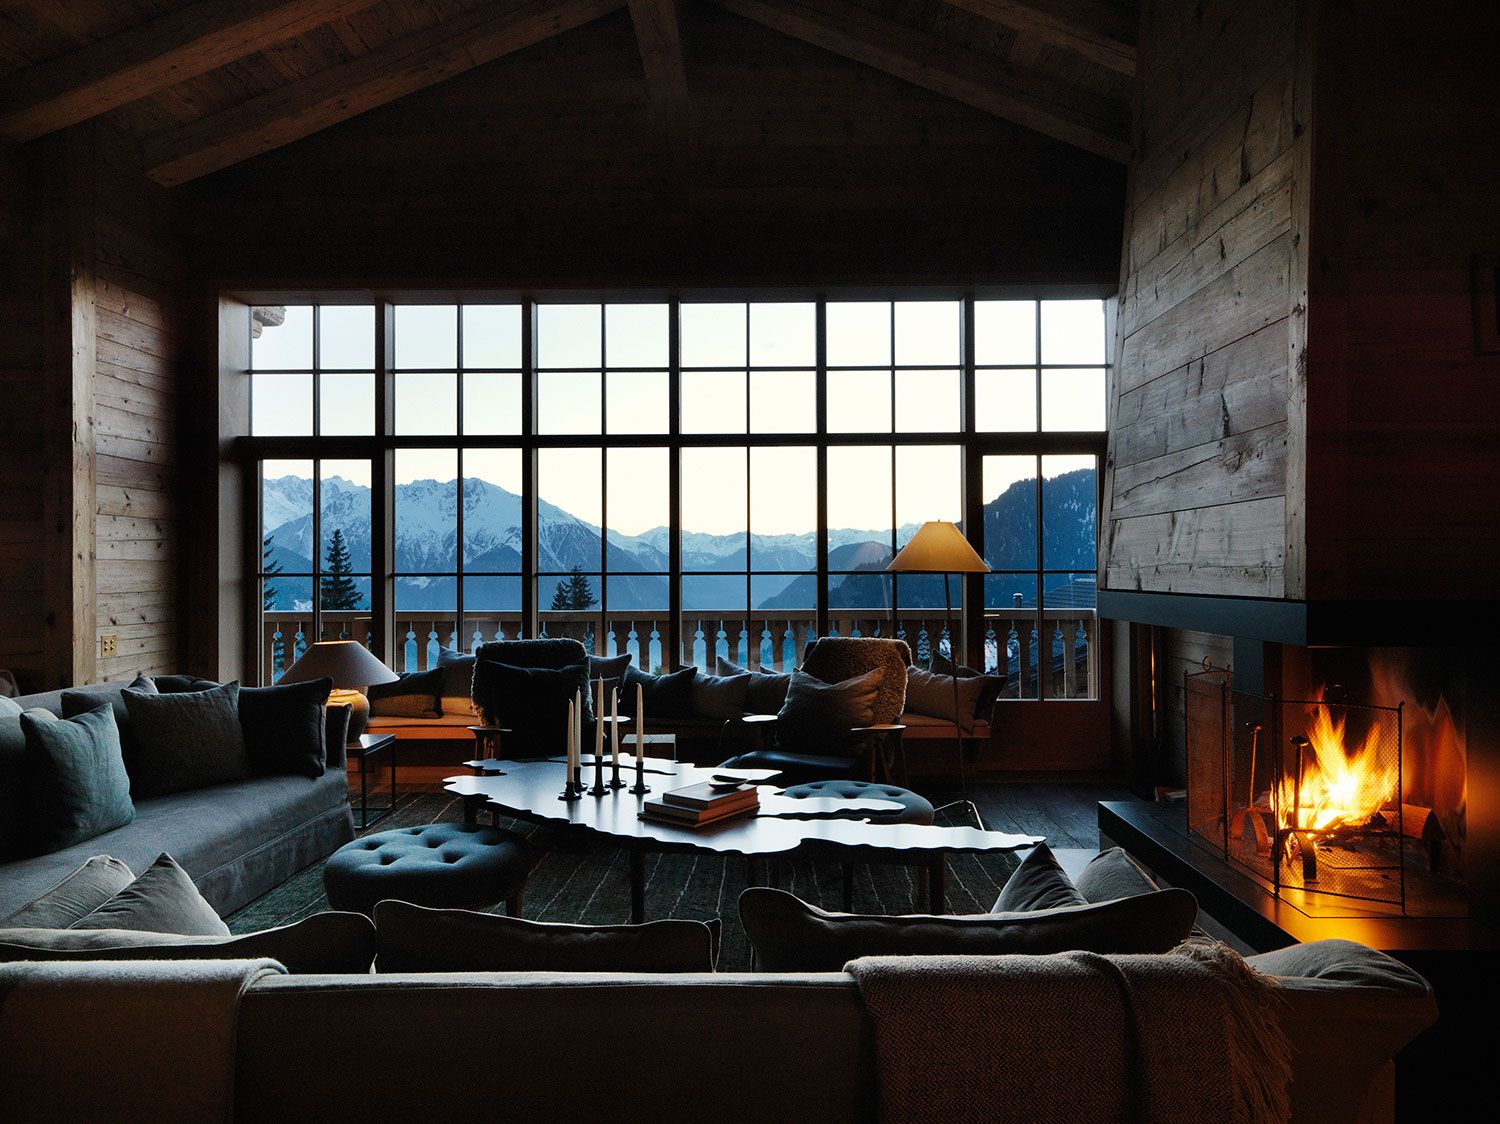 Fireplace Cozy Winter Wallpapers.